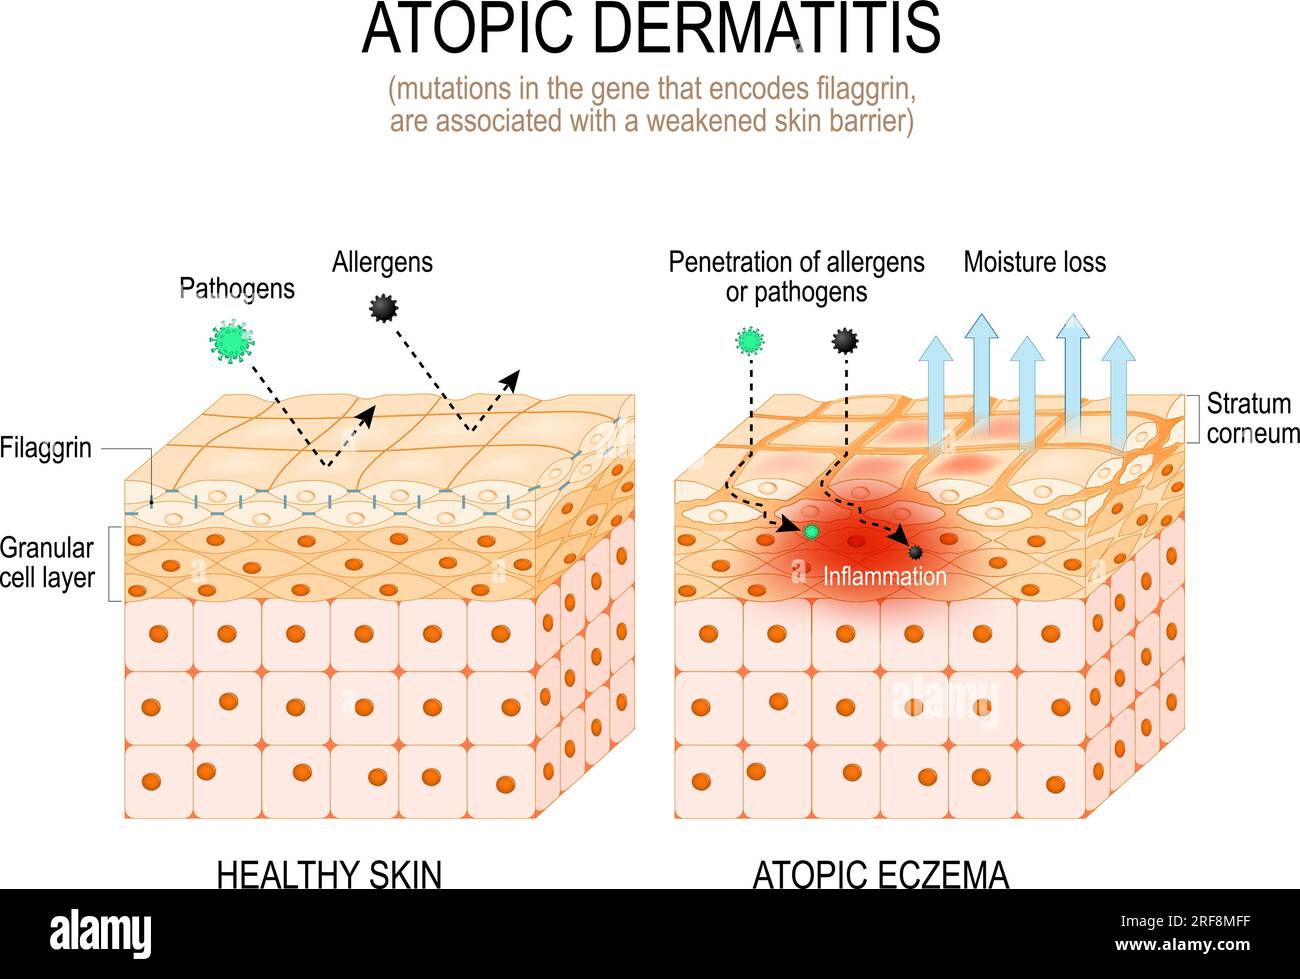 Atopic dermatitis. Filaggrin theory and atopic eczema. mutations in the gene that encodes filaggrin, are associated with a weakened skin barrier. Stock Vector